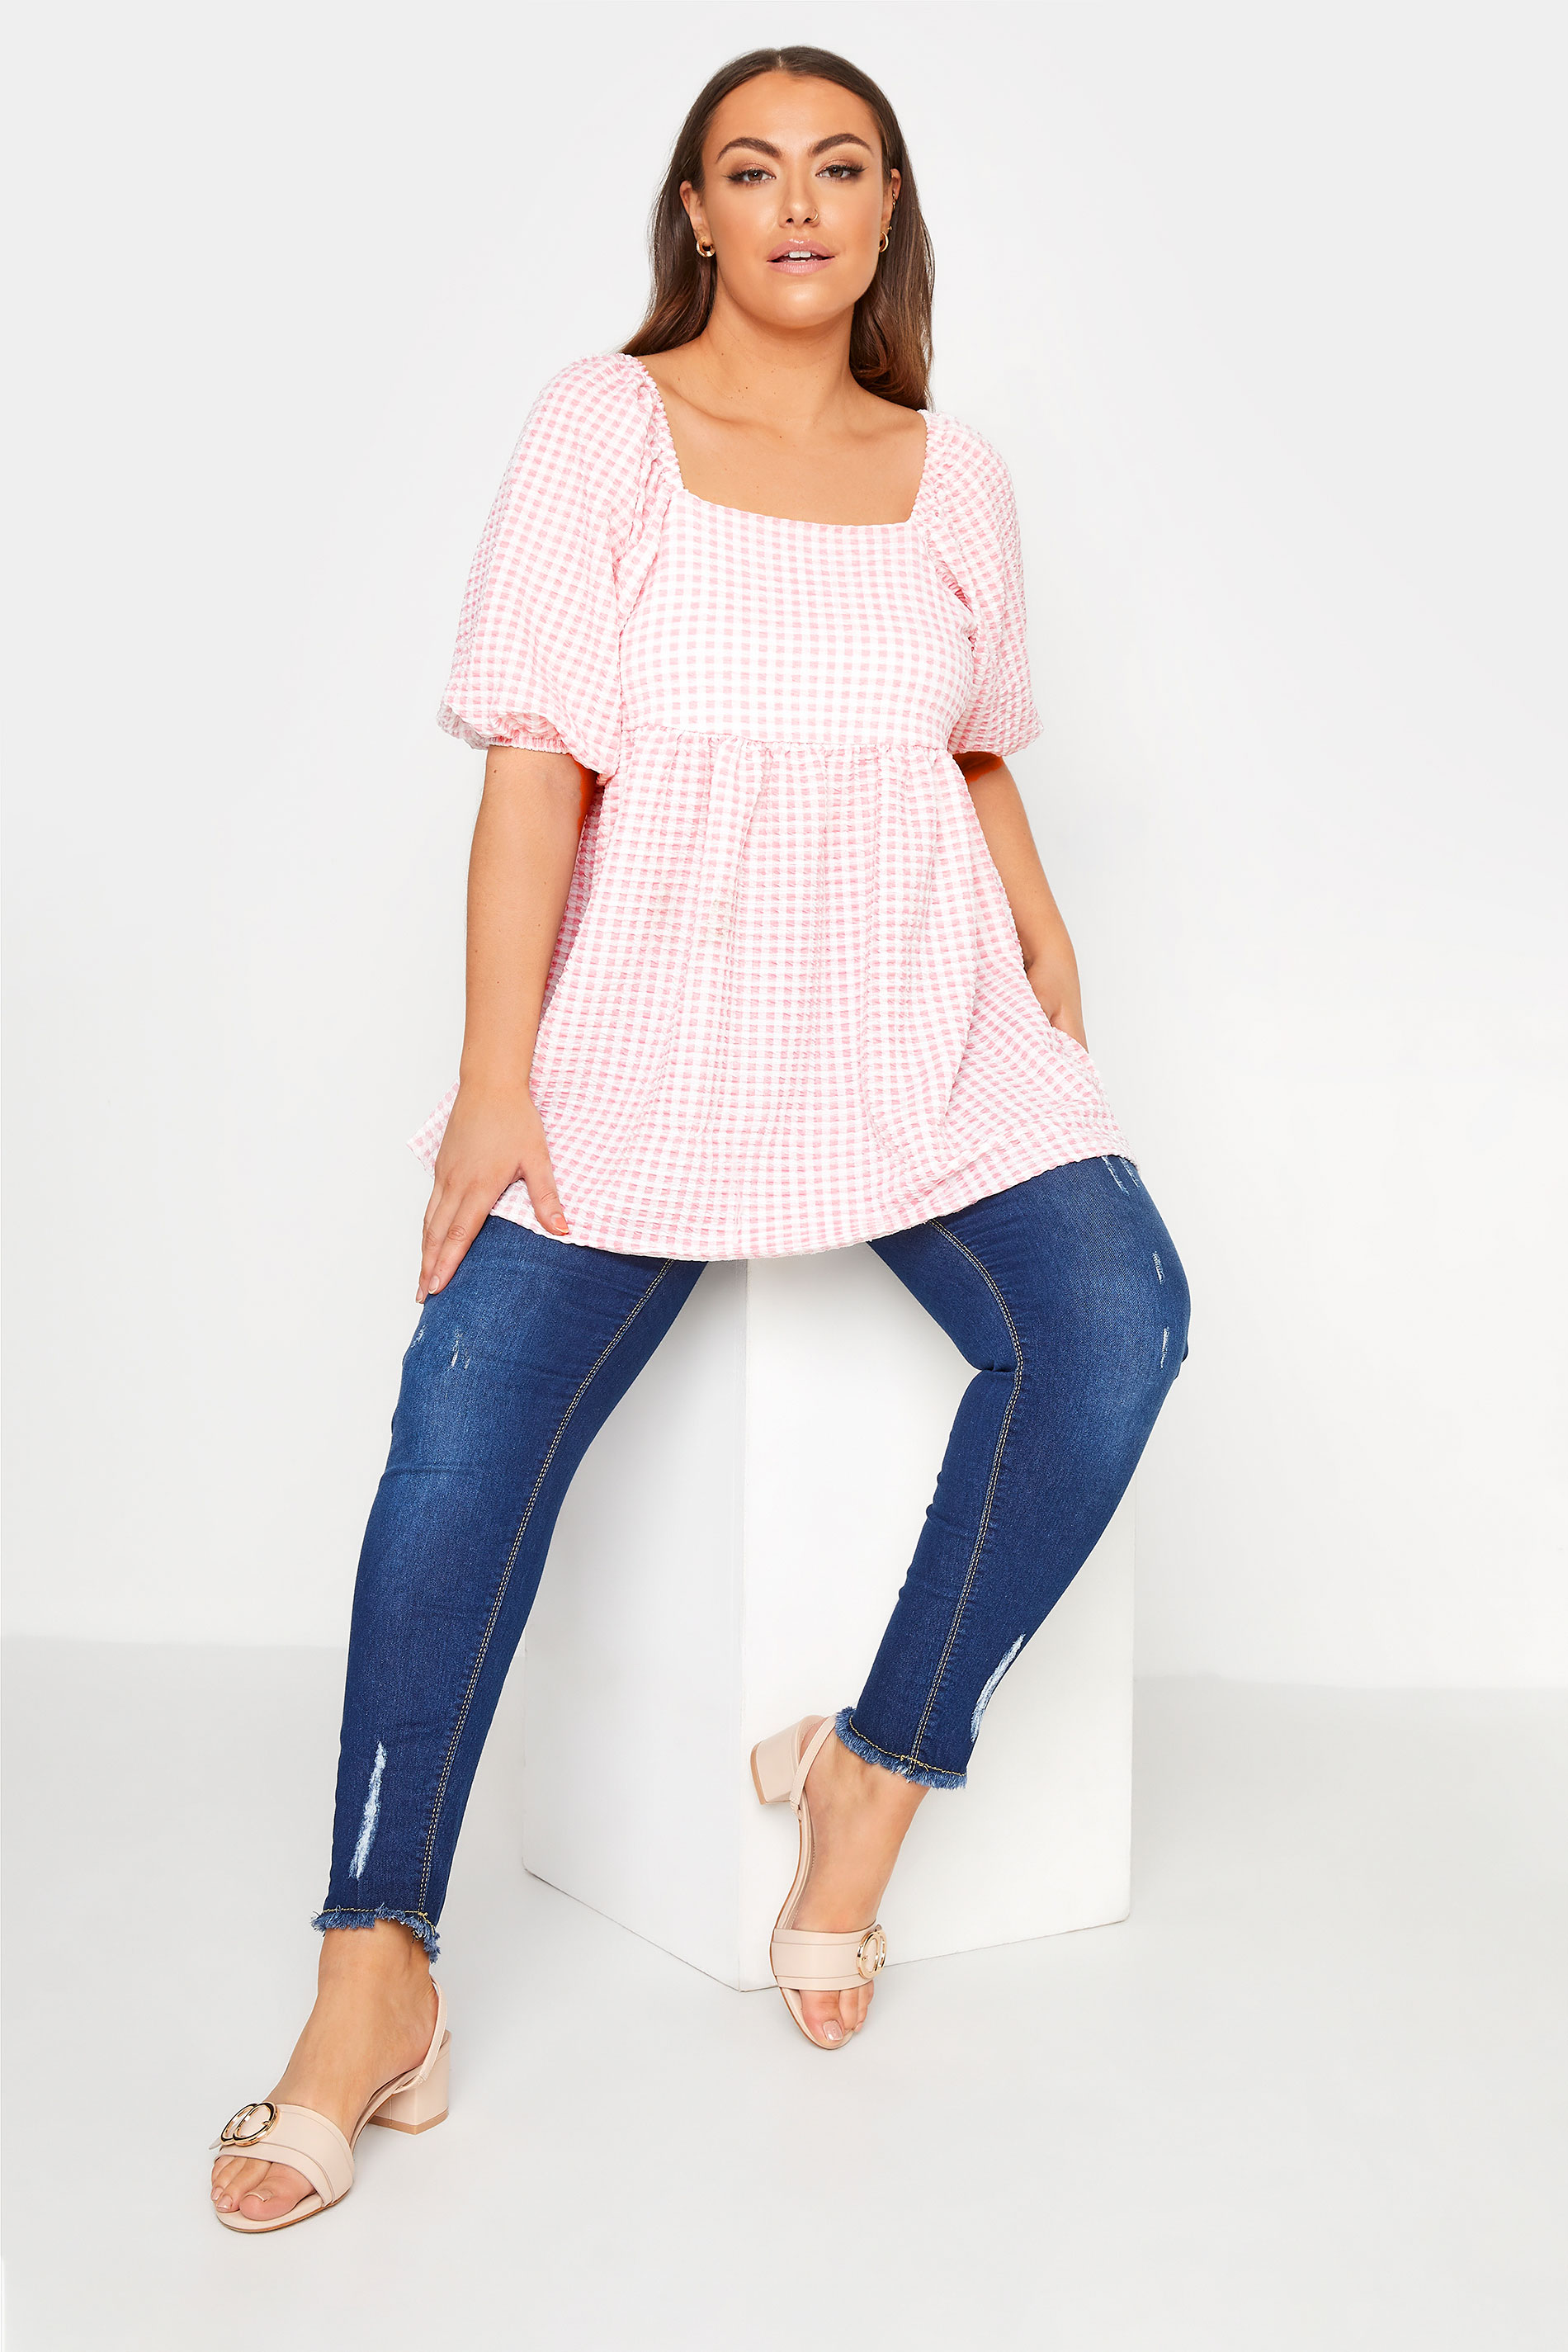 LIMITED COLLECTION Pink Gingham Milkmaid Top | Yours Clothing 2